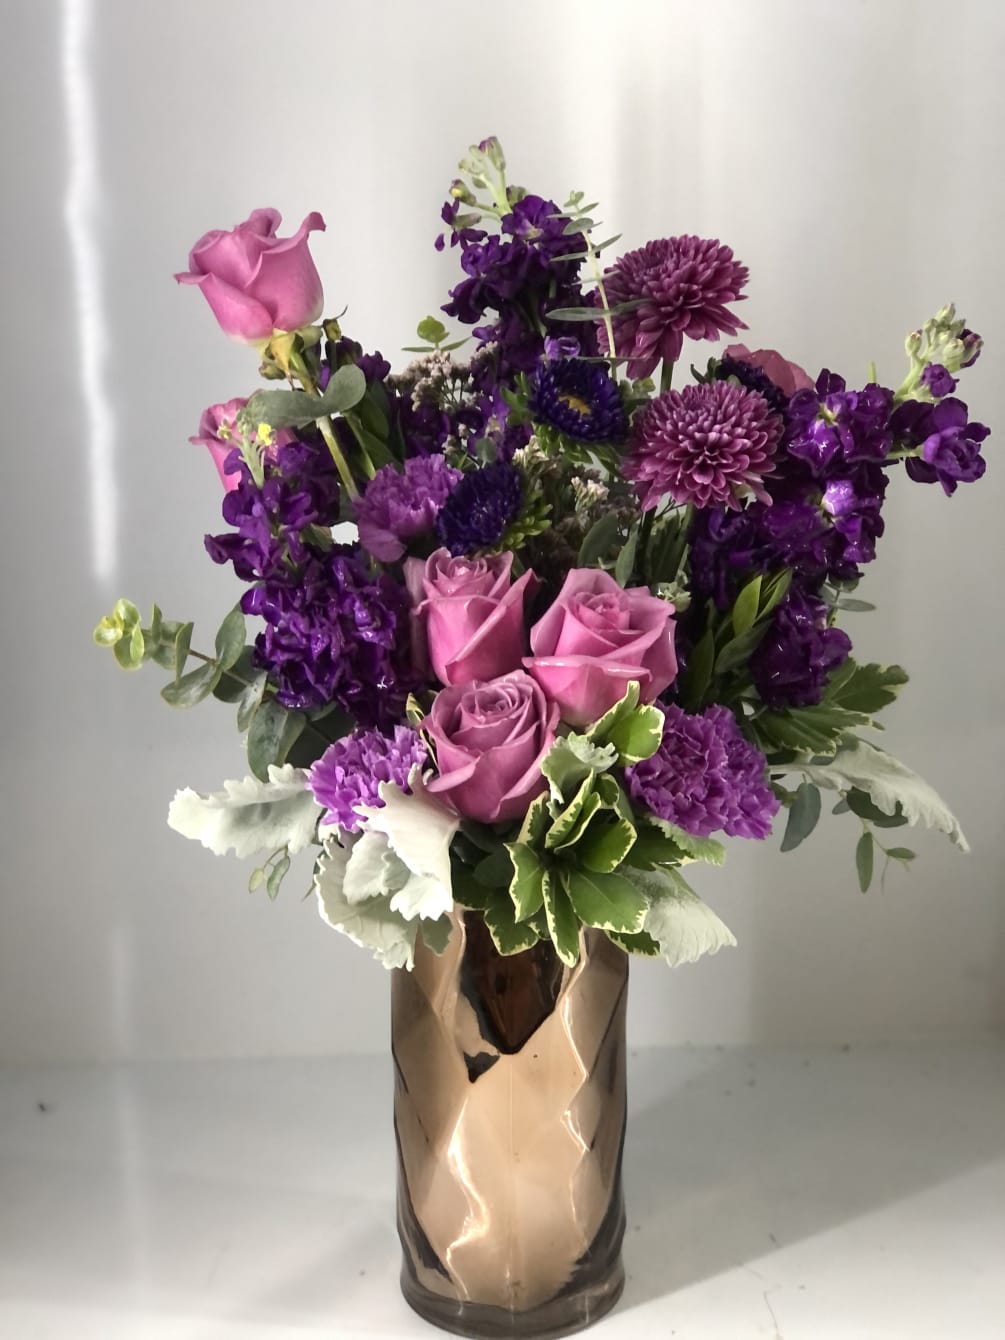 All lavender and purple blooms! In a classy gold vase (May change